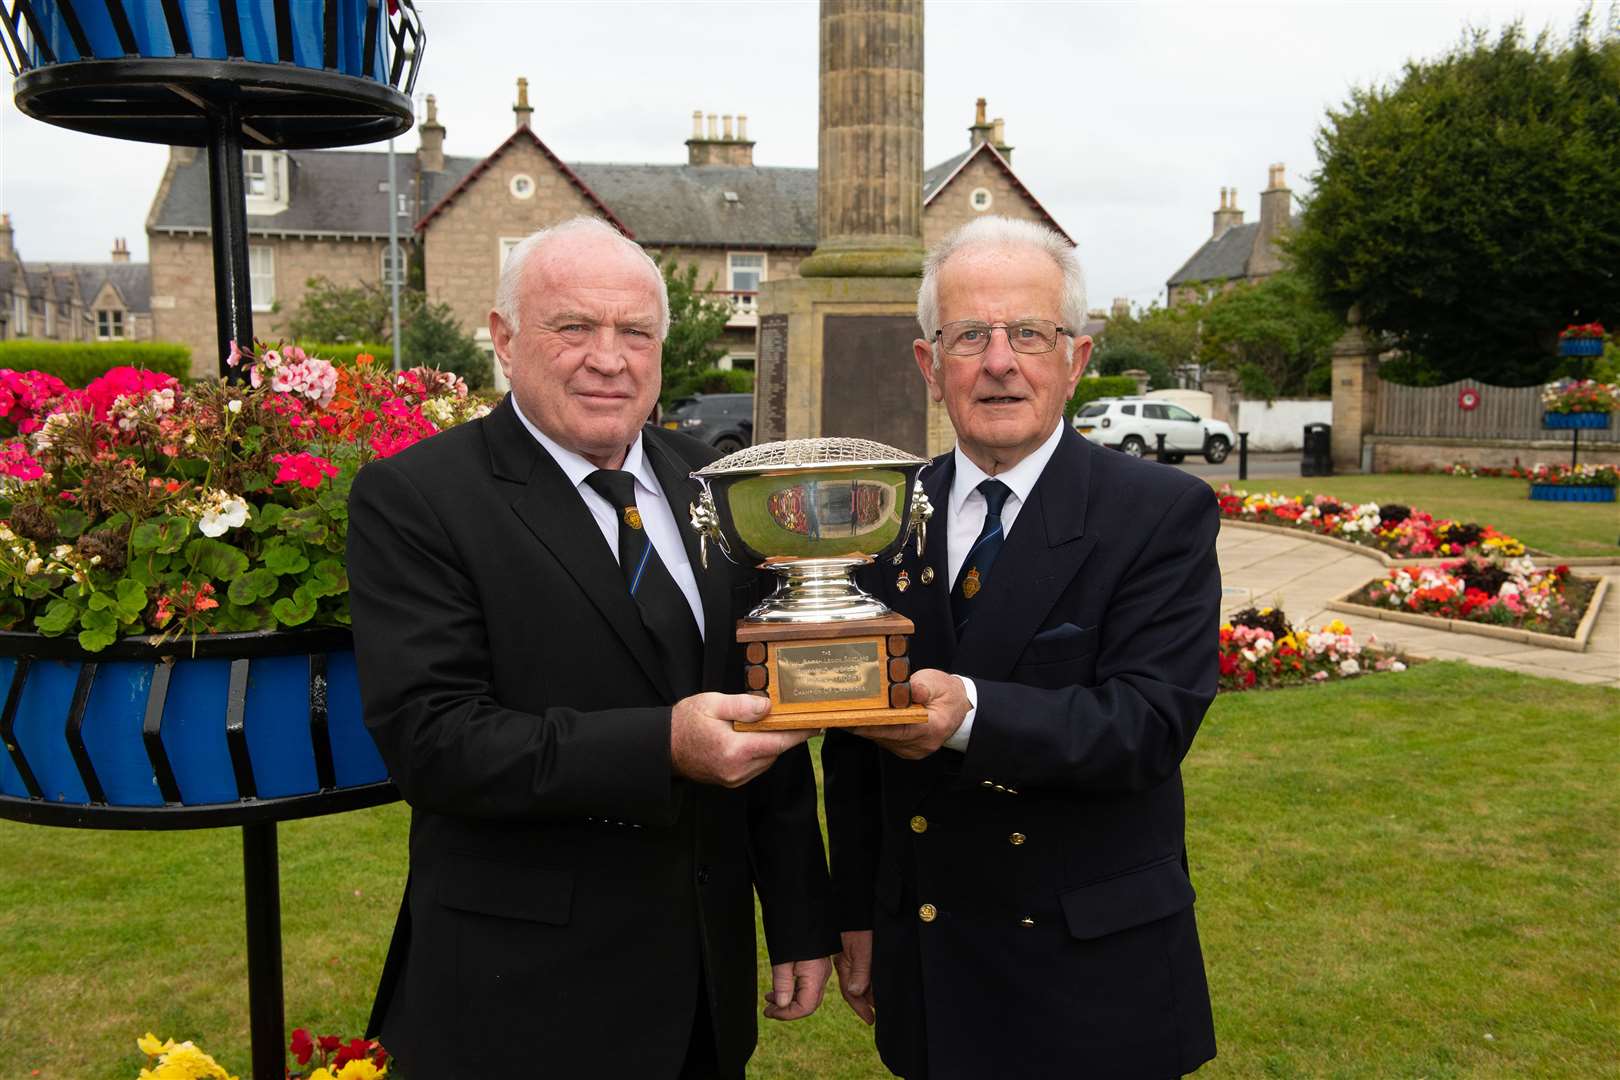 Nairn Royal British Legion Welfare Officer Garnet Main and President Bob Towns with the trophy.